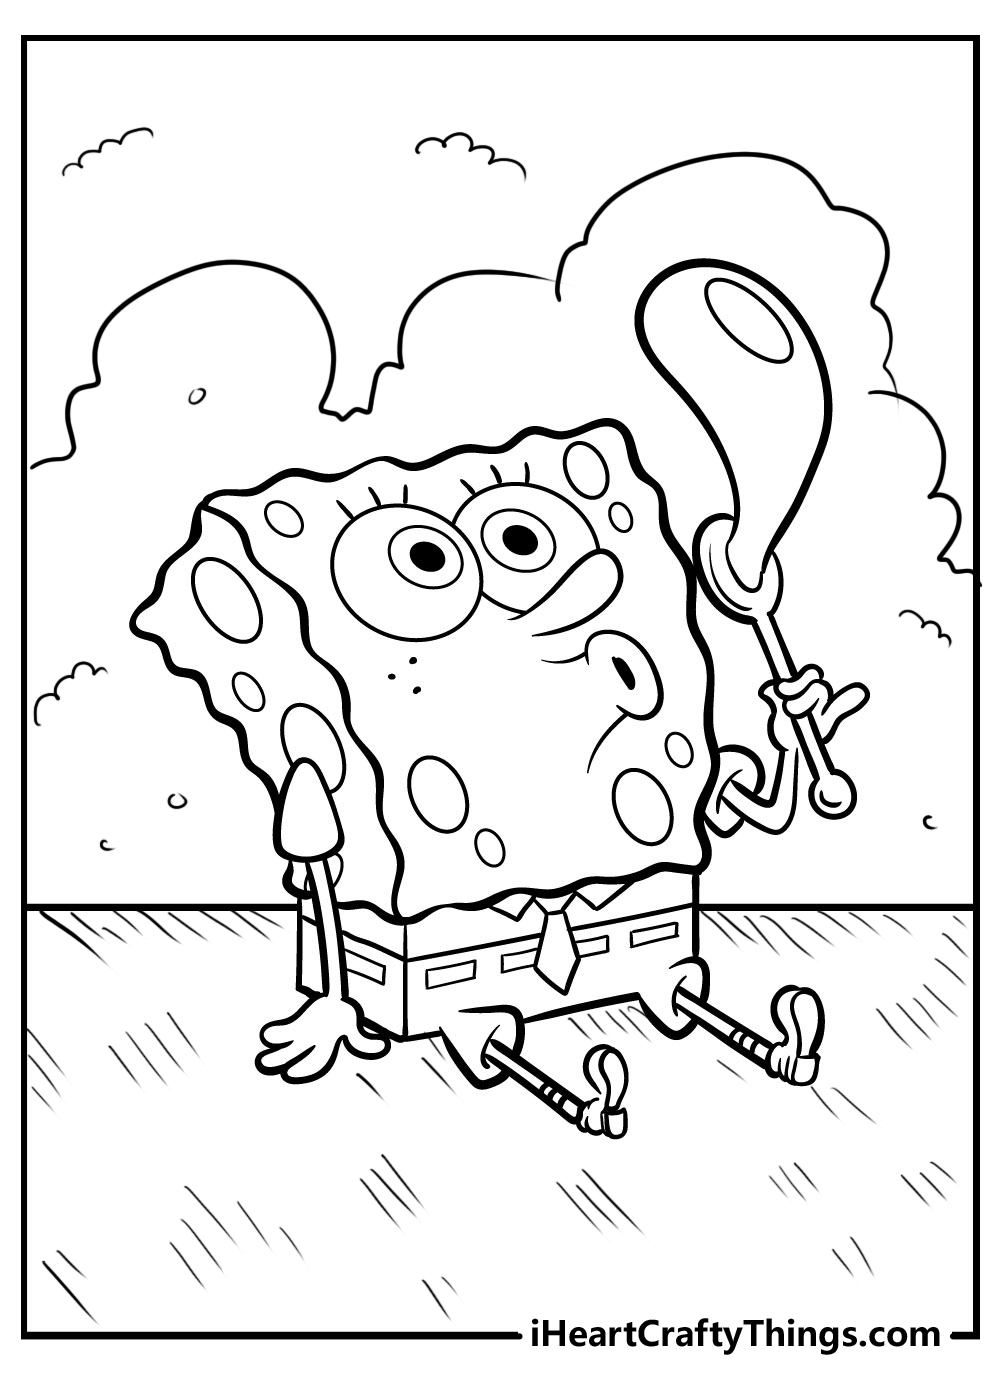 Patrick Star Coloring Pages With Bubbles On It